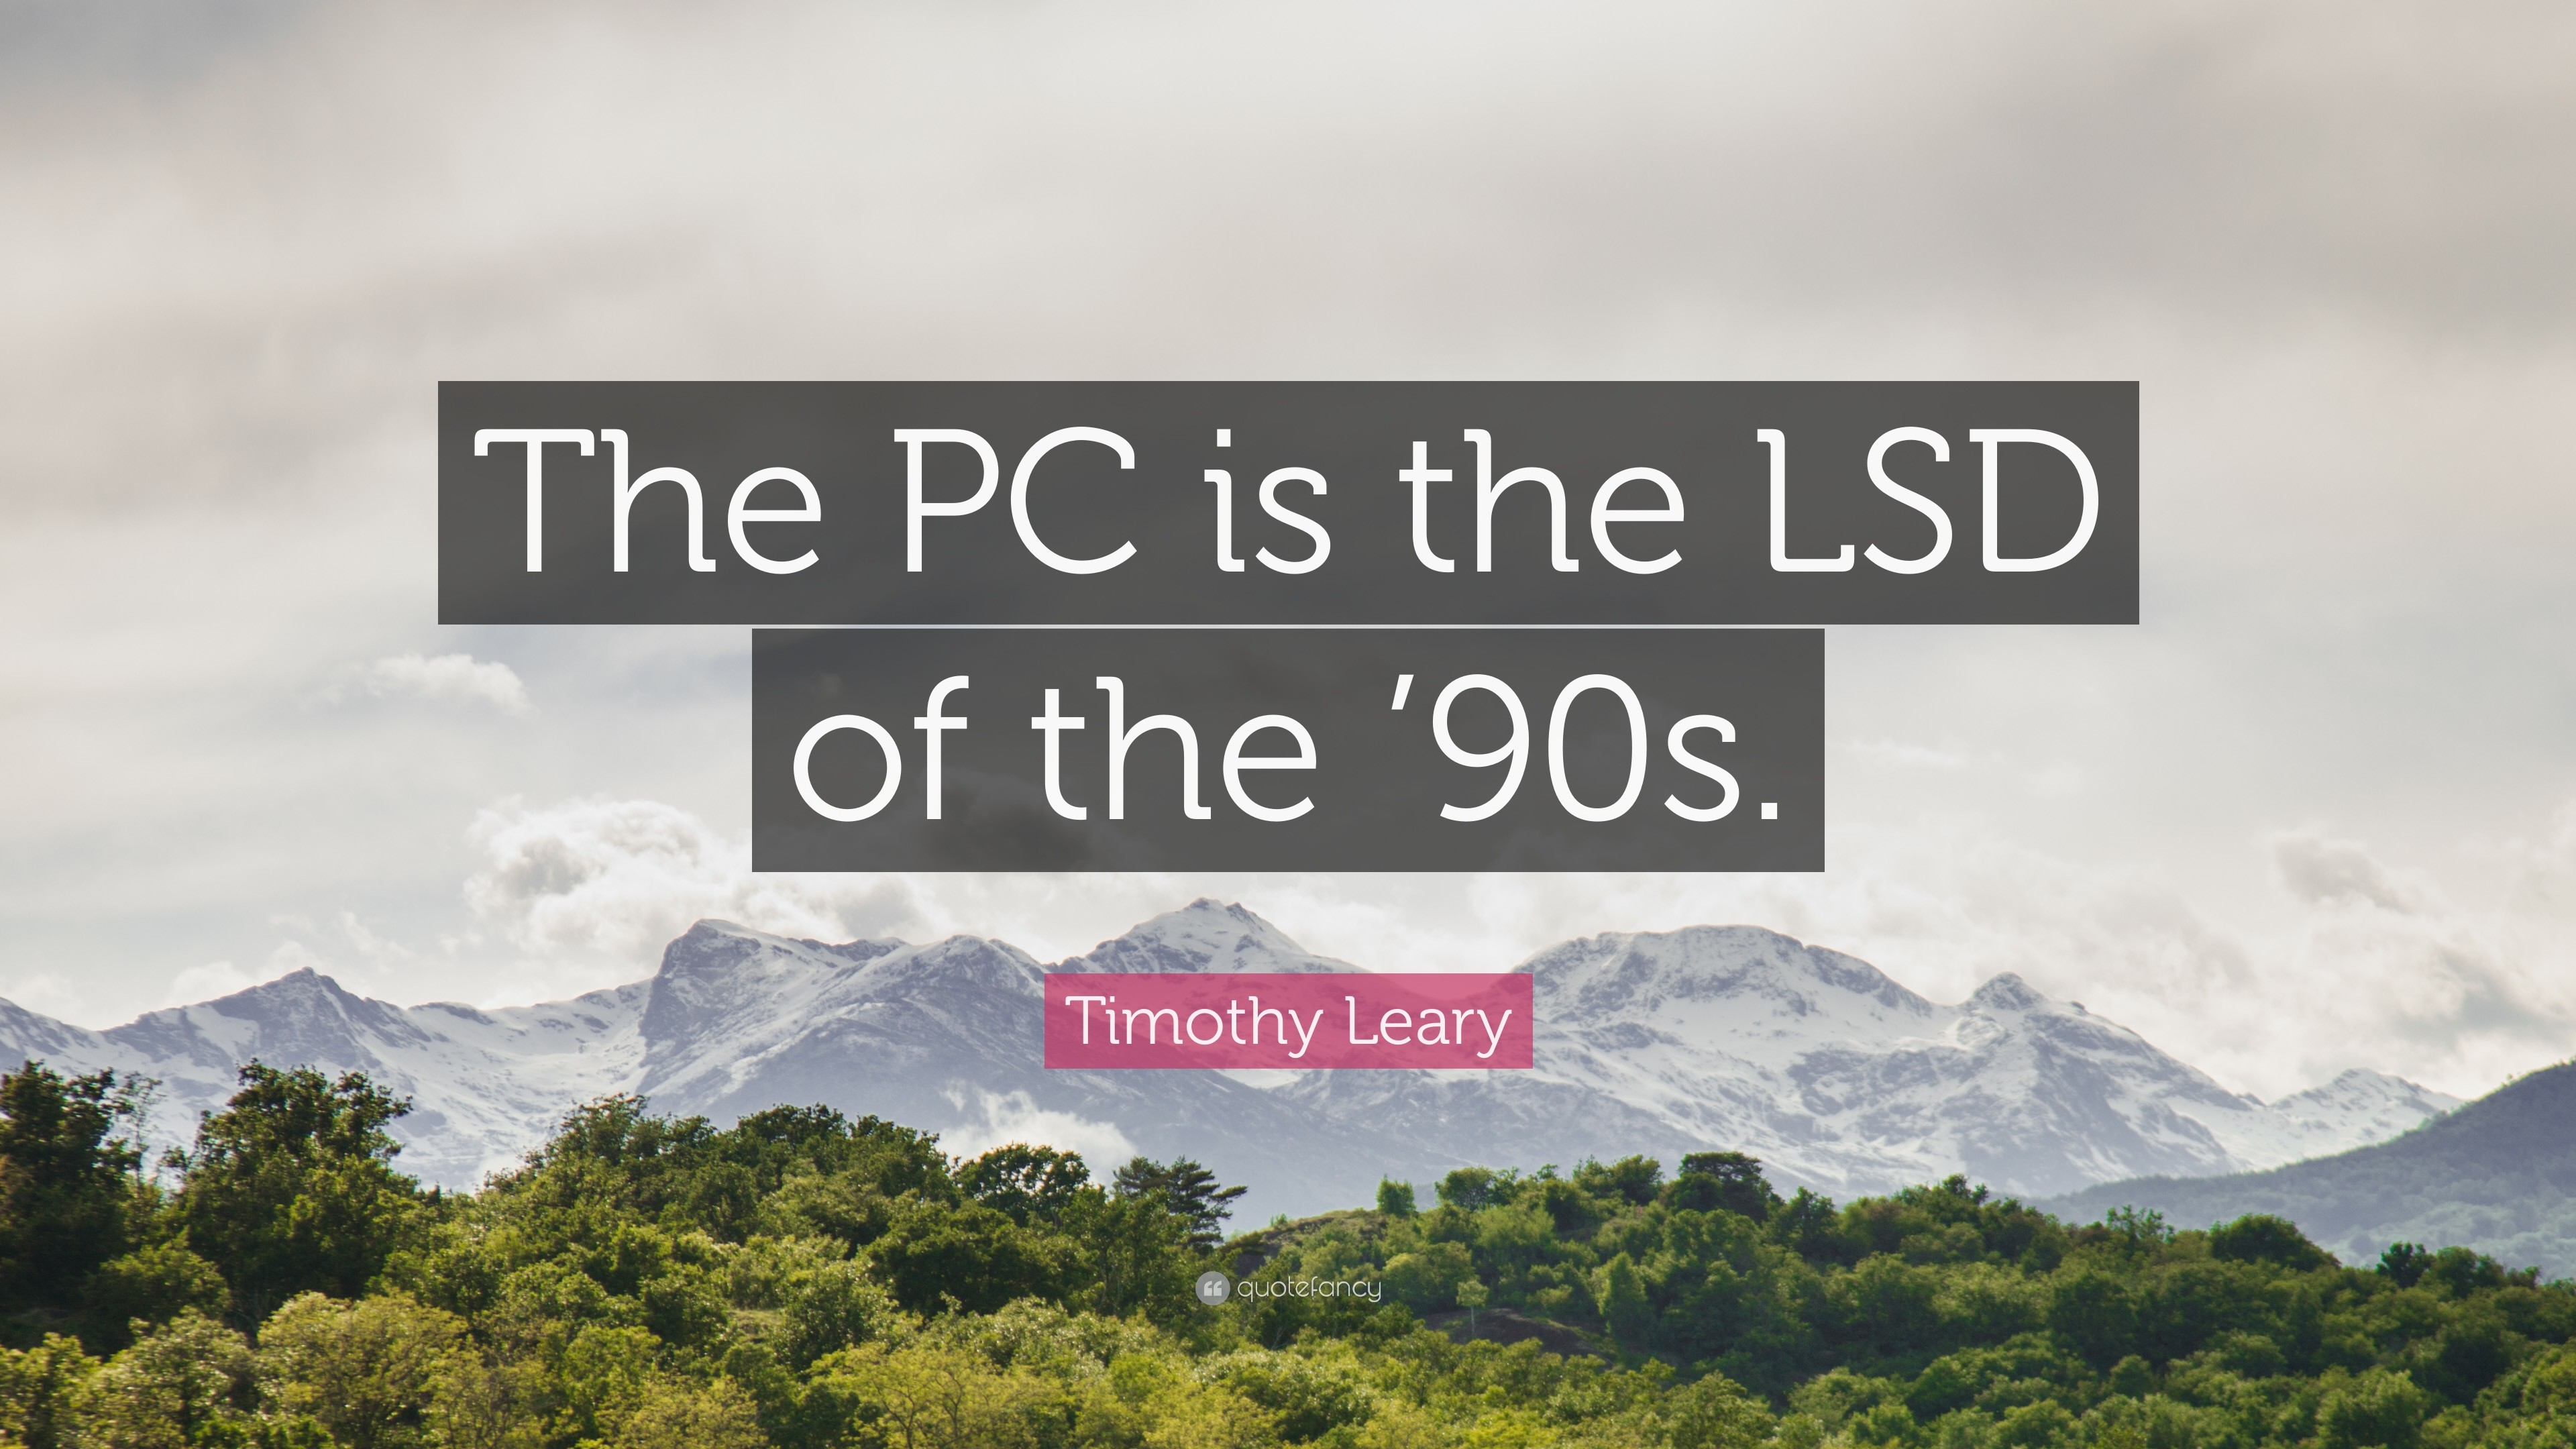 3840x2160 Timothy Leary Quotes (100 wallpapers) - Quotefancy